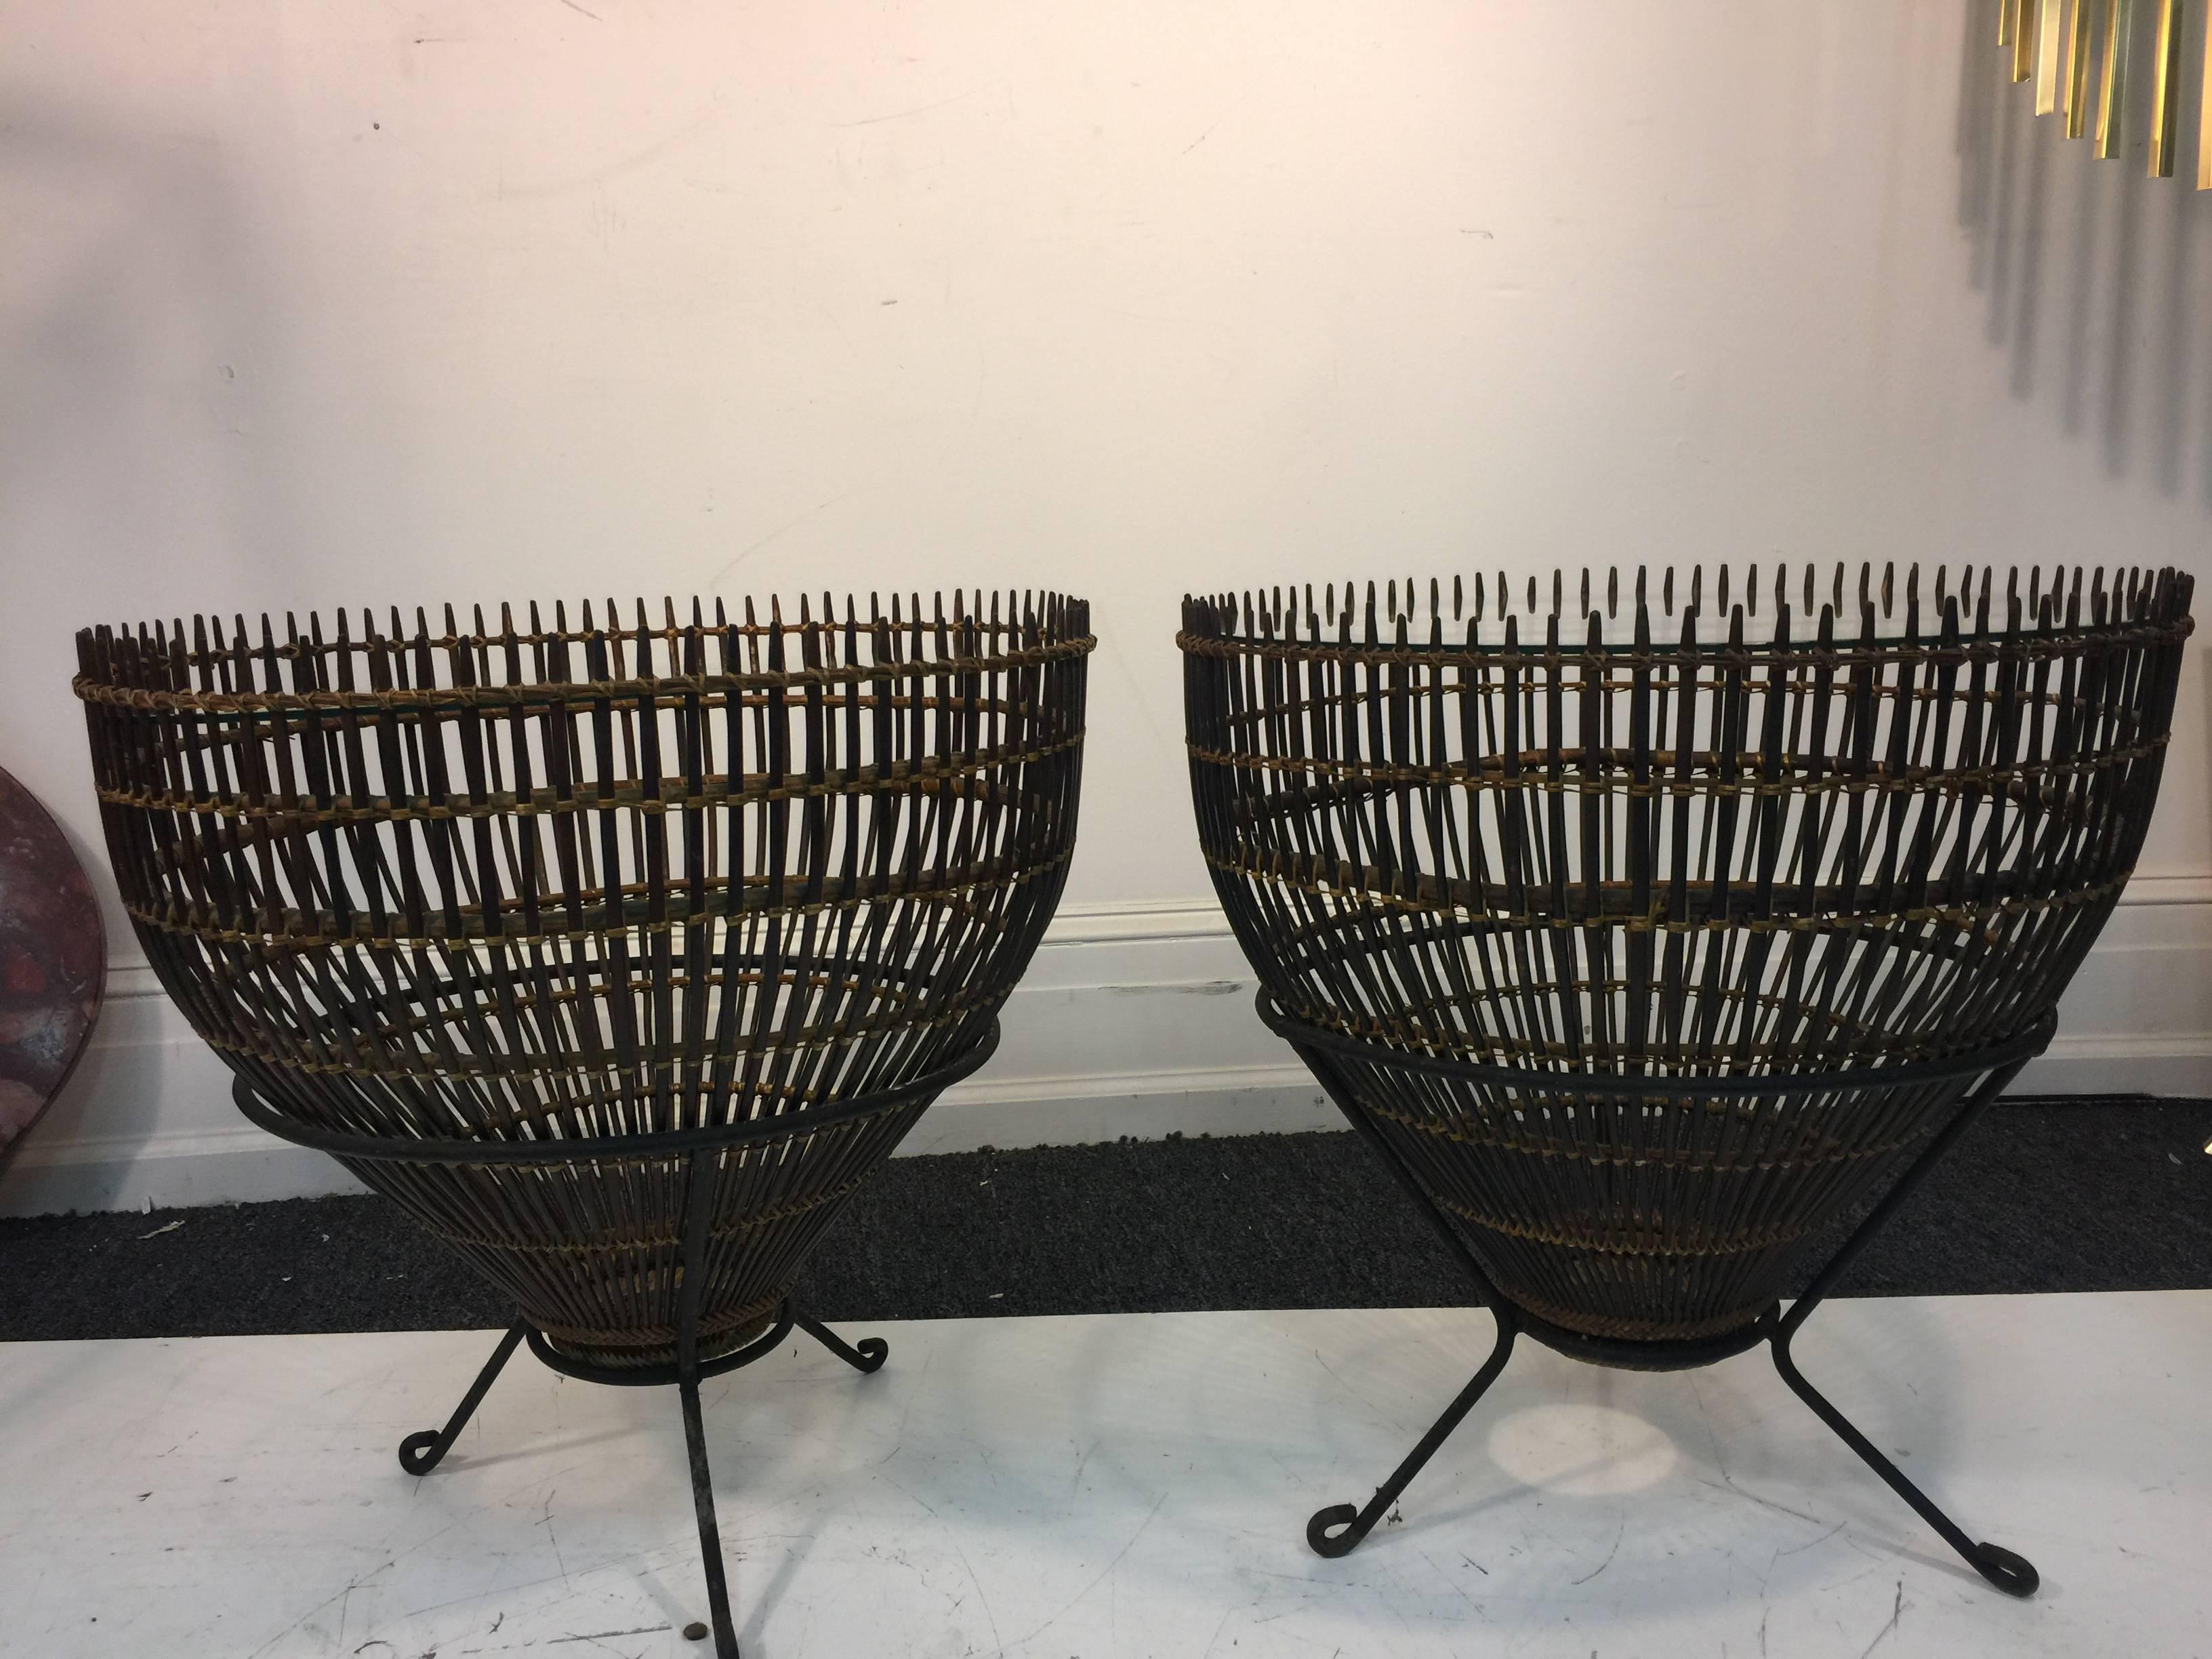 A fantastic pair of Franco Albini Italian side tables constructed from rattan fish baskets, and on sculpted iron bases, circa 1950. Good vintage condition with age appropriate wear.